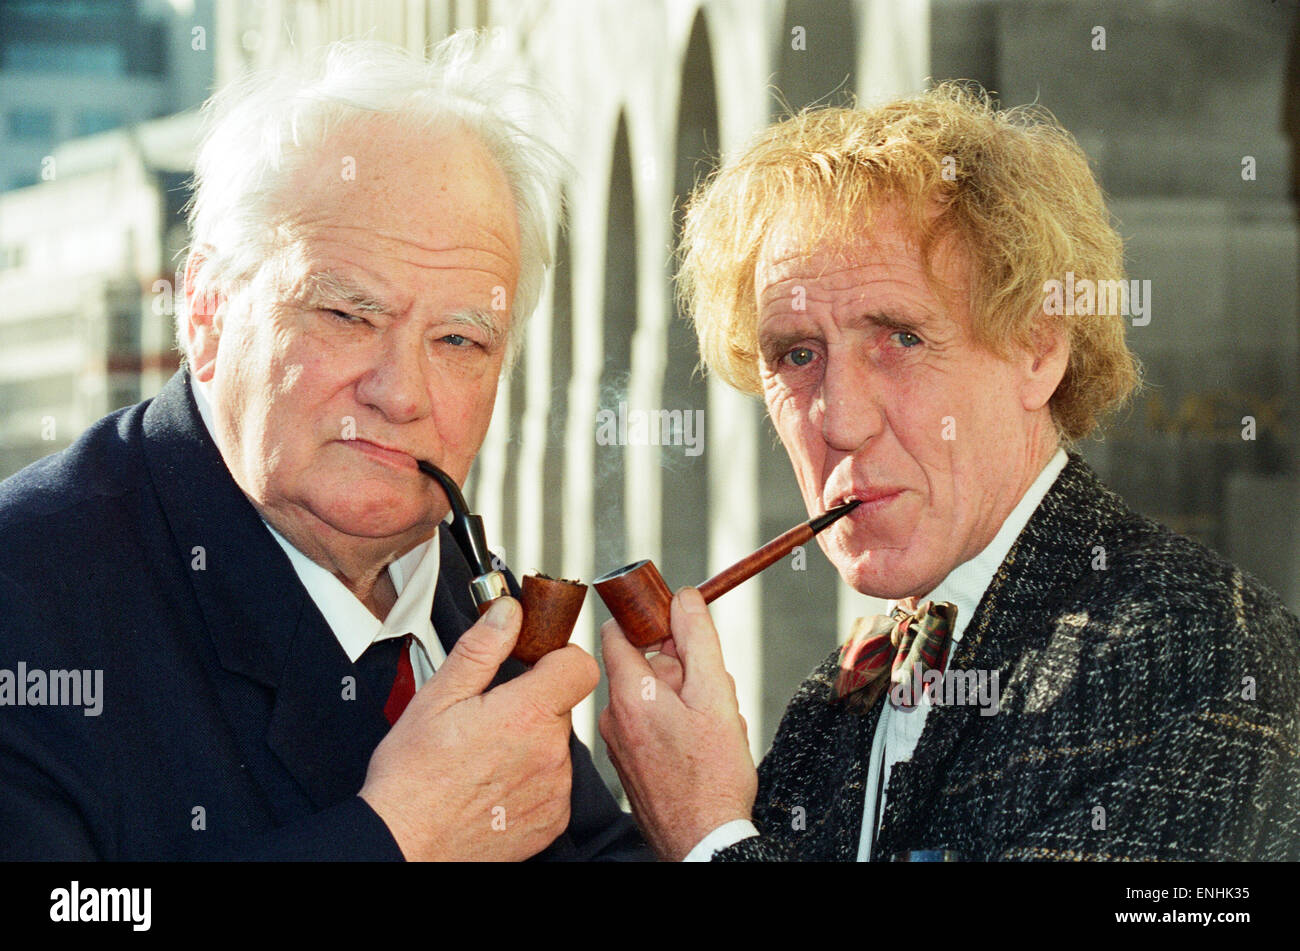 rod-hull-pipe-smoker-of-the-year-1993-seen-here-with-patrick-moore-ENHK35.jpg